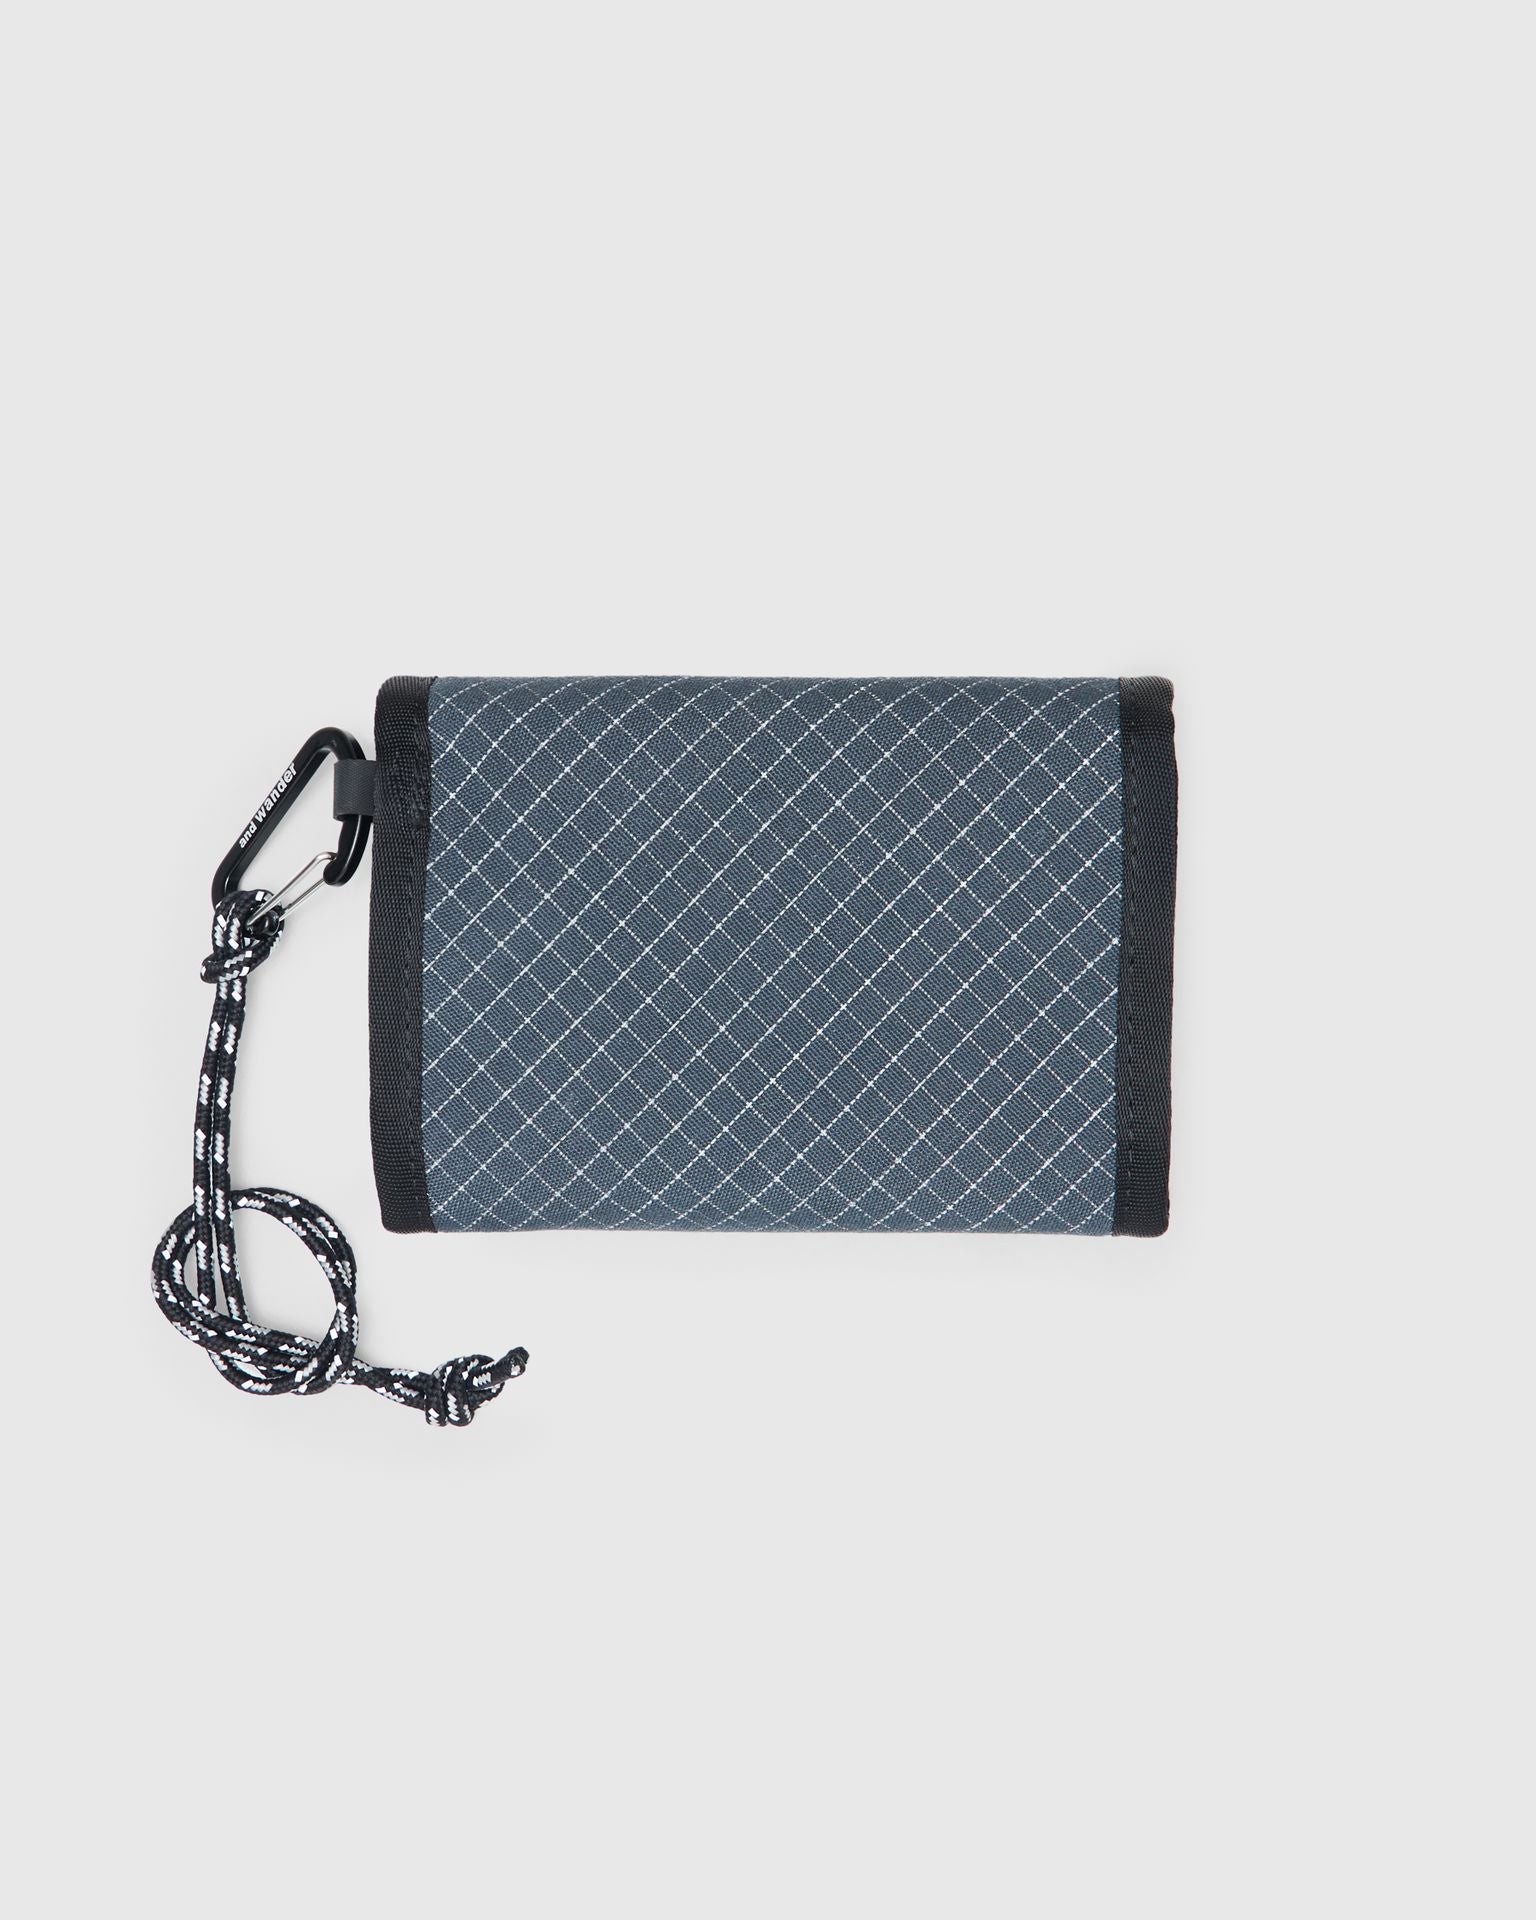 Reflective Rip Wallet in Charcoal